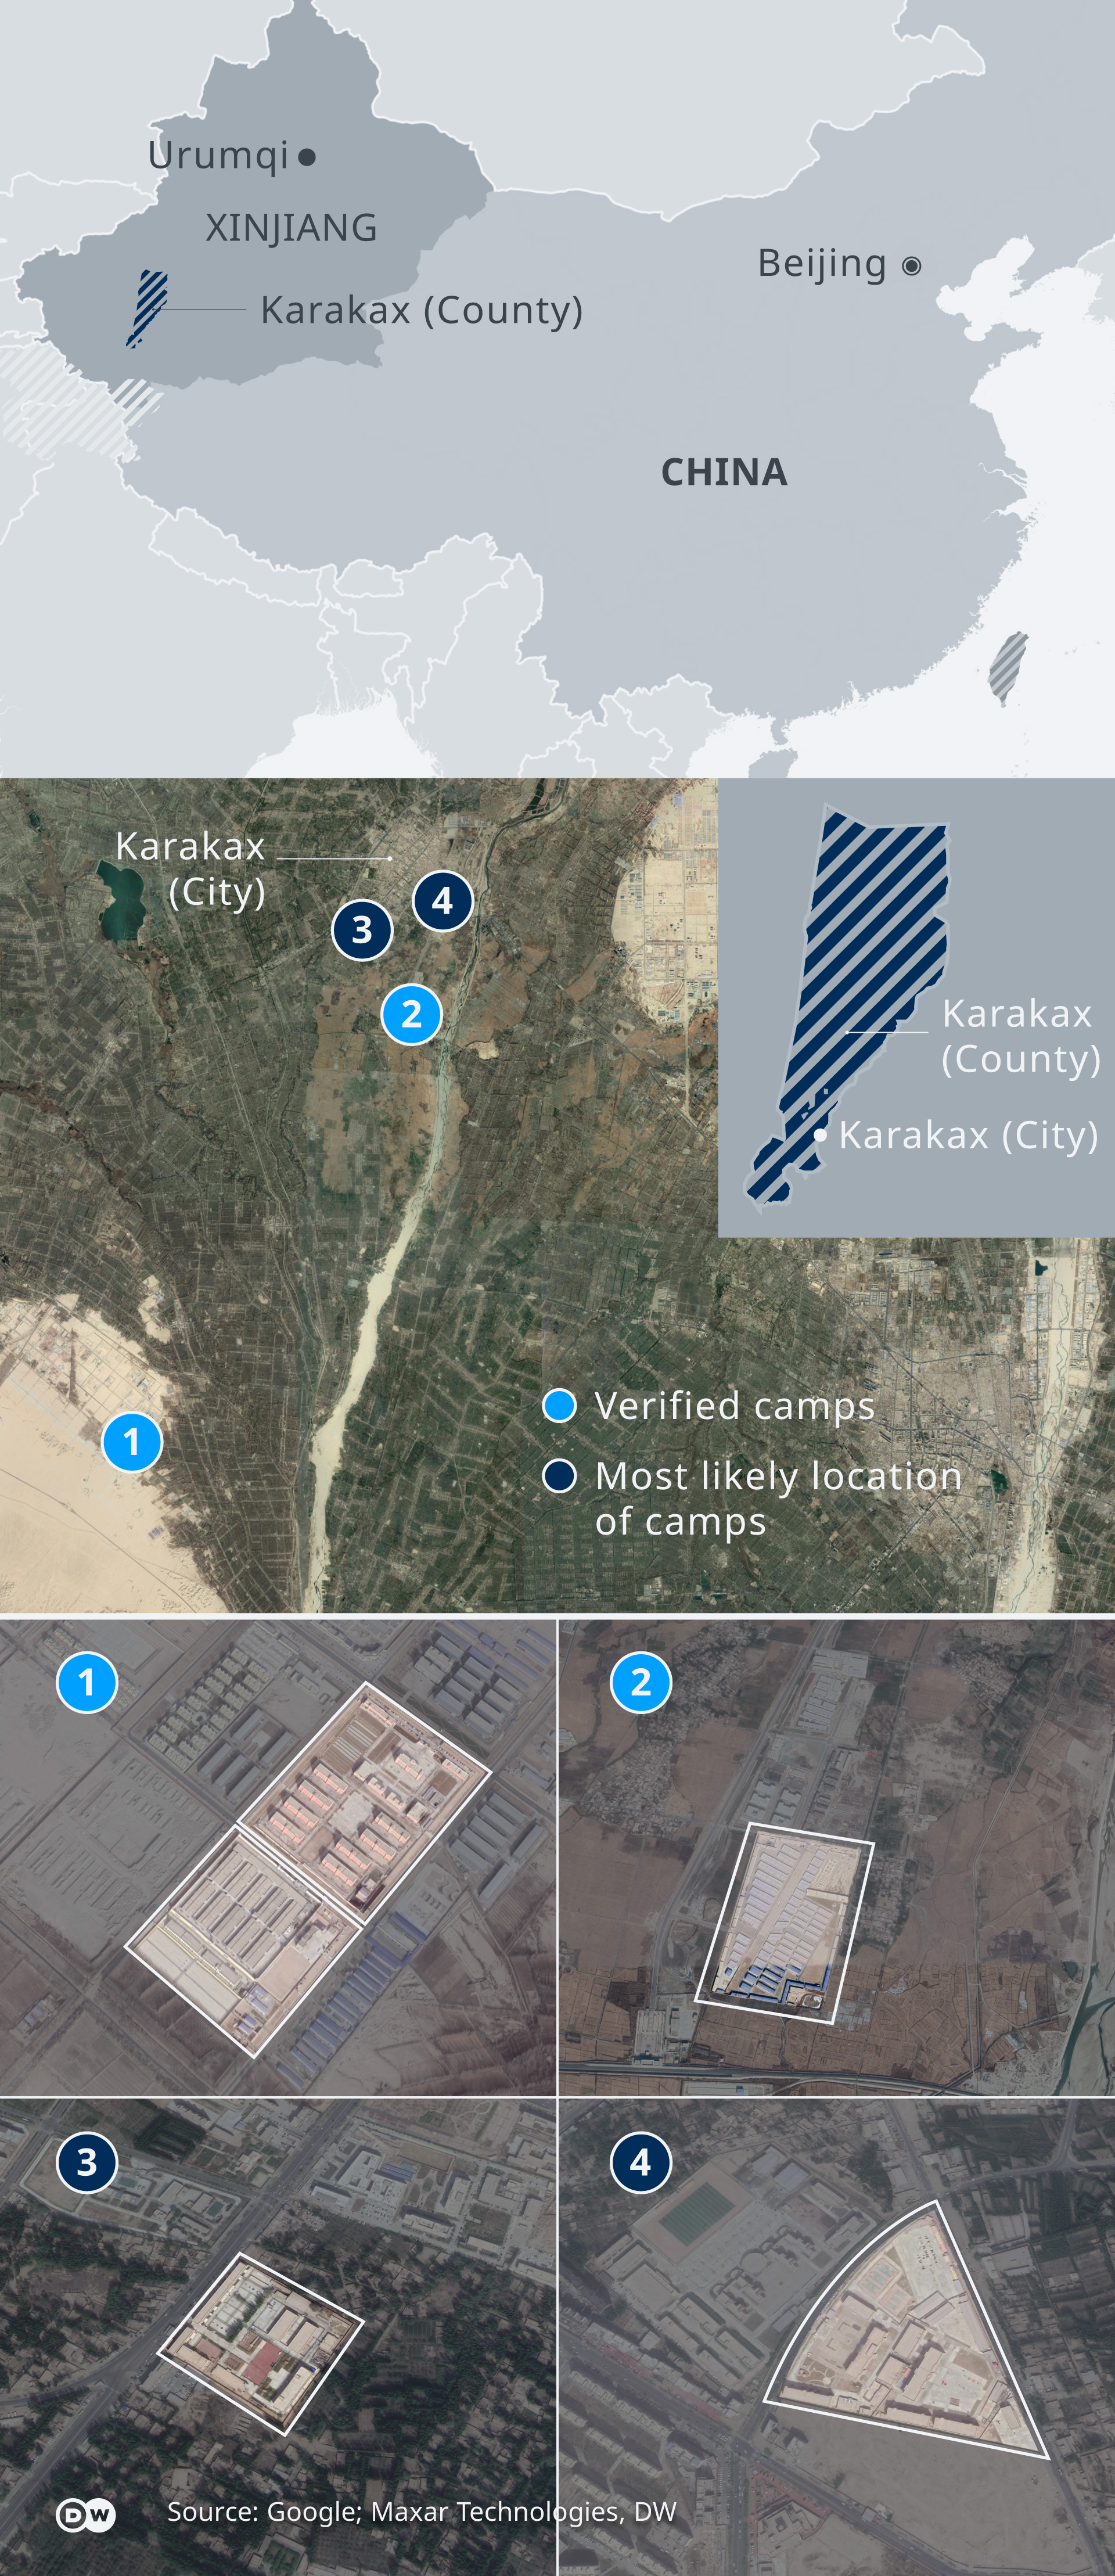 A map of Karakax County and satellite images of Chinese 're-education' camps